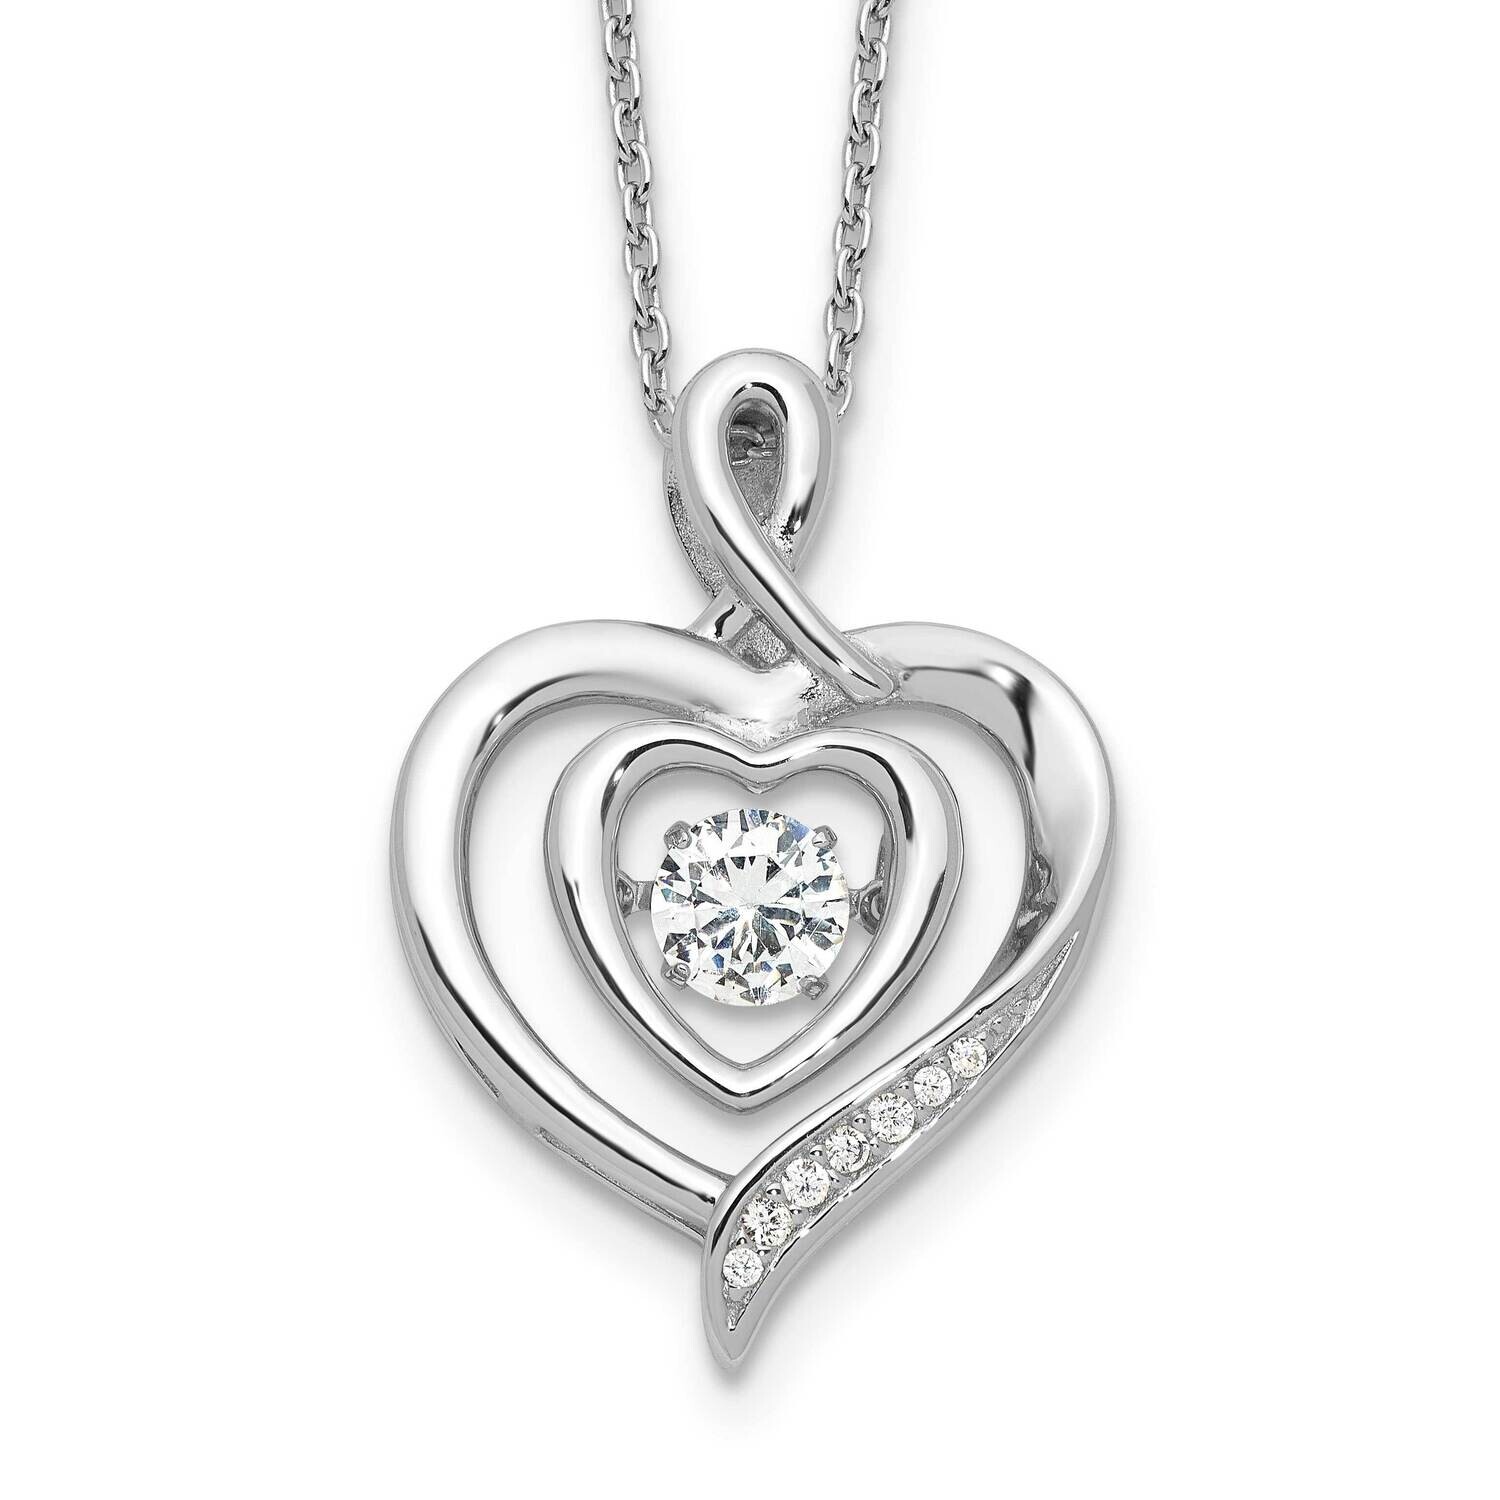 Cheryl M Brilliant-Cut Vibrant CZ Awareness Heart 18 Inch Necklace 2 Inch Extender Sterling Silver Rhodium-Plated QCM1613-18